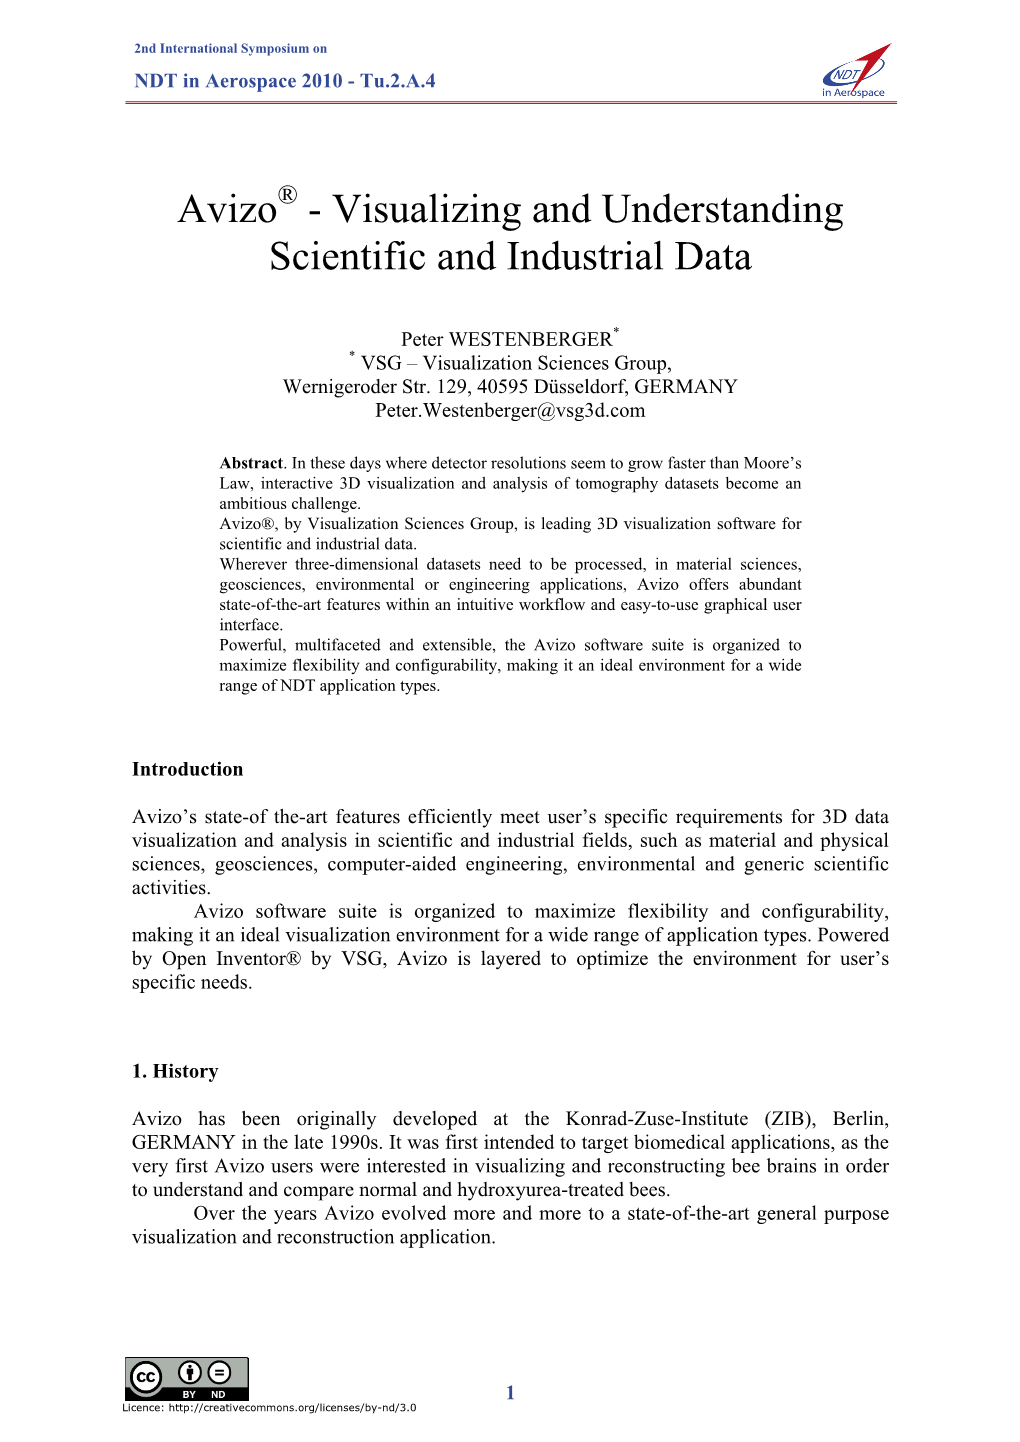 Avizo® - Visualizing and Understanding Scientific and Industrial Data